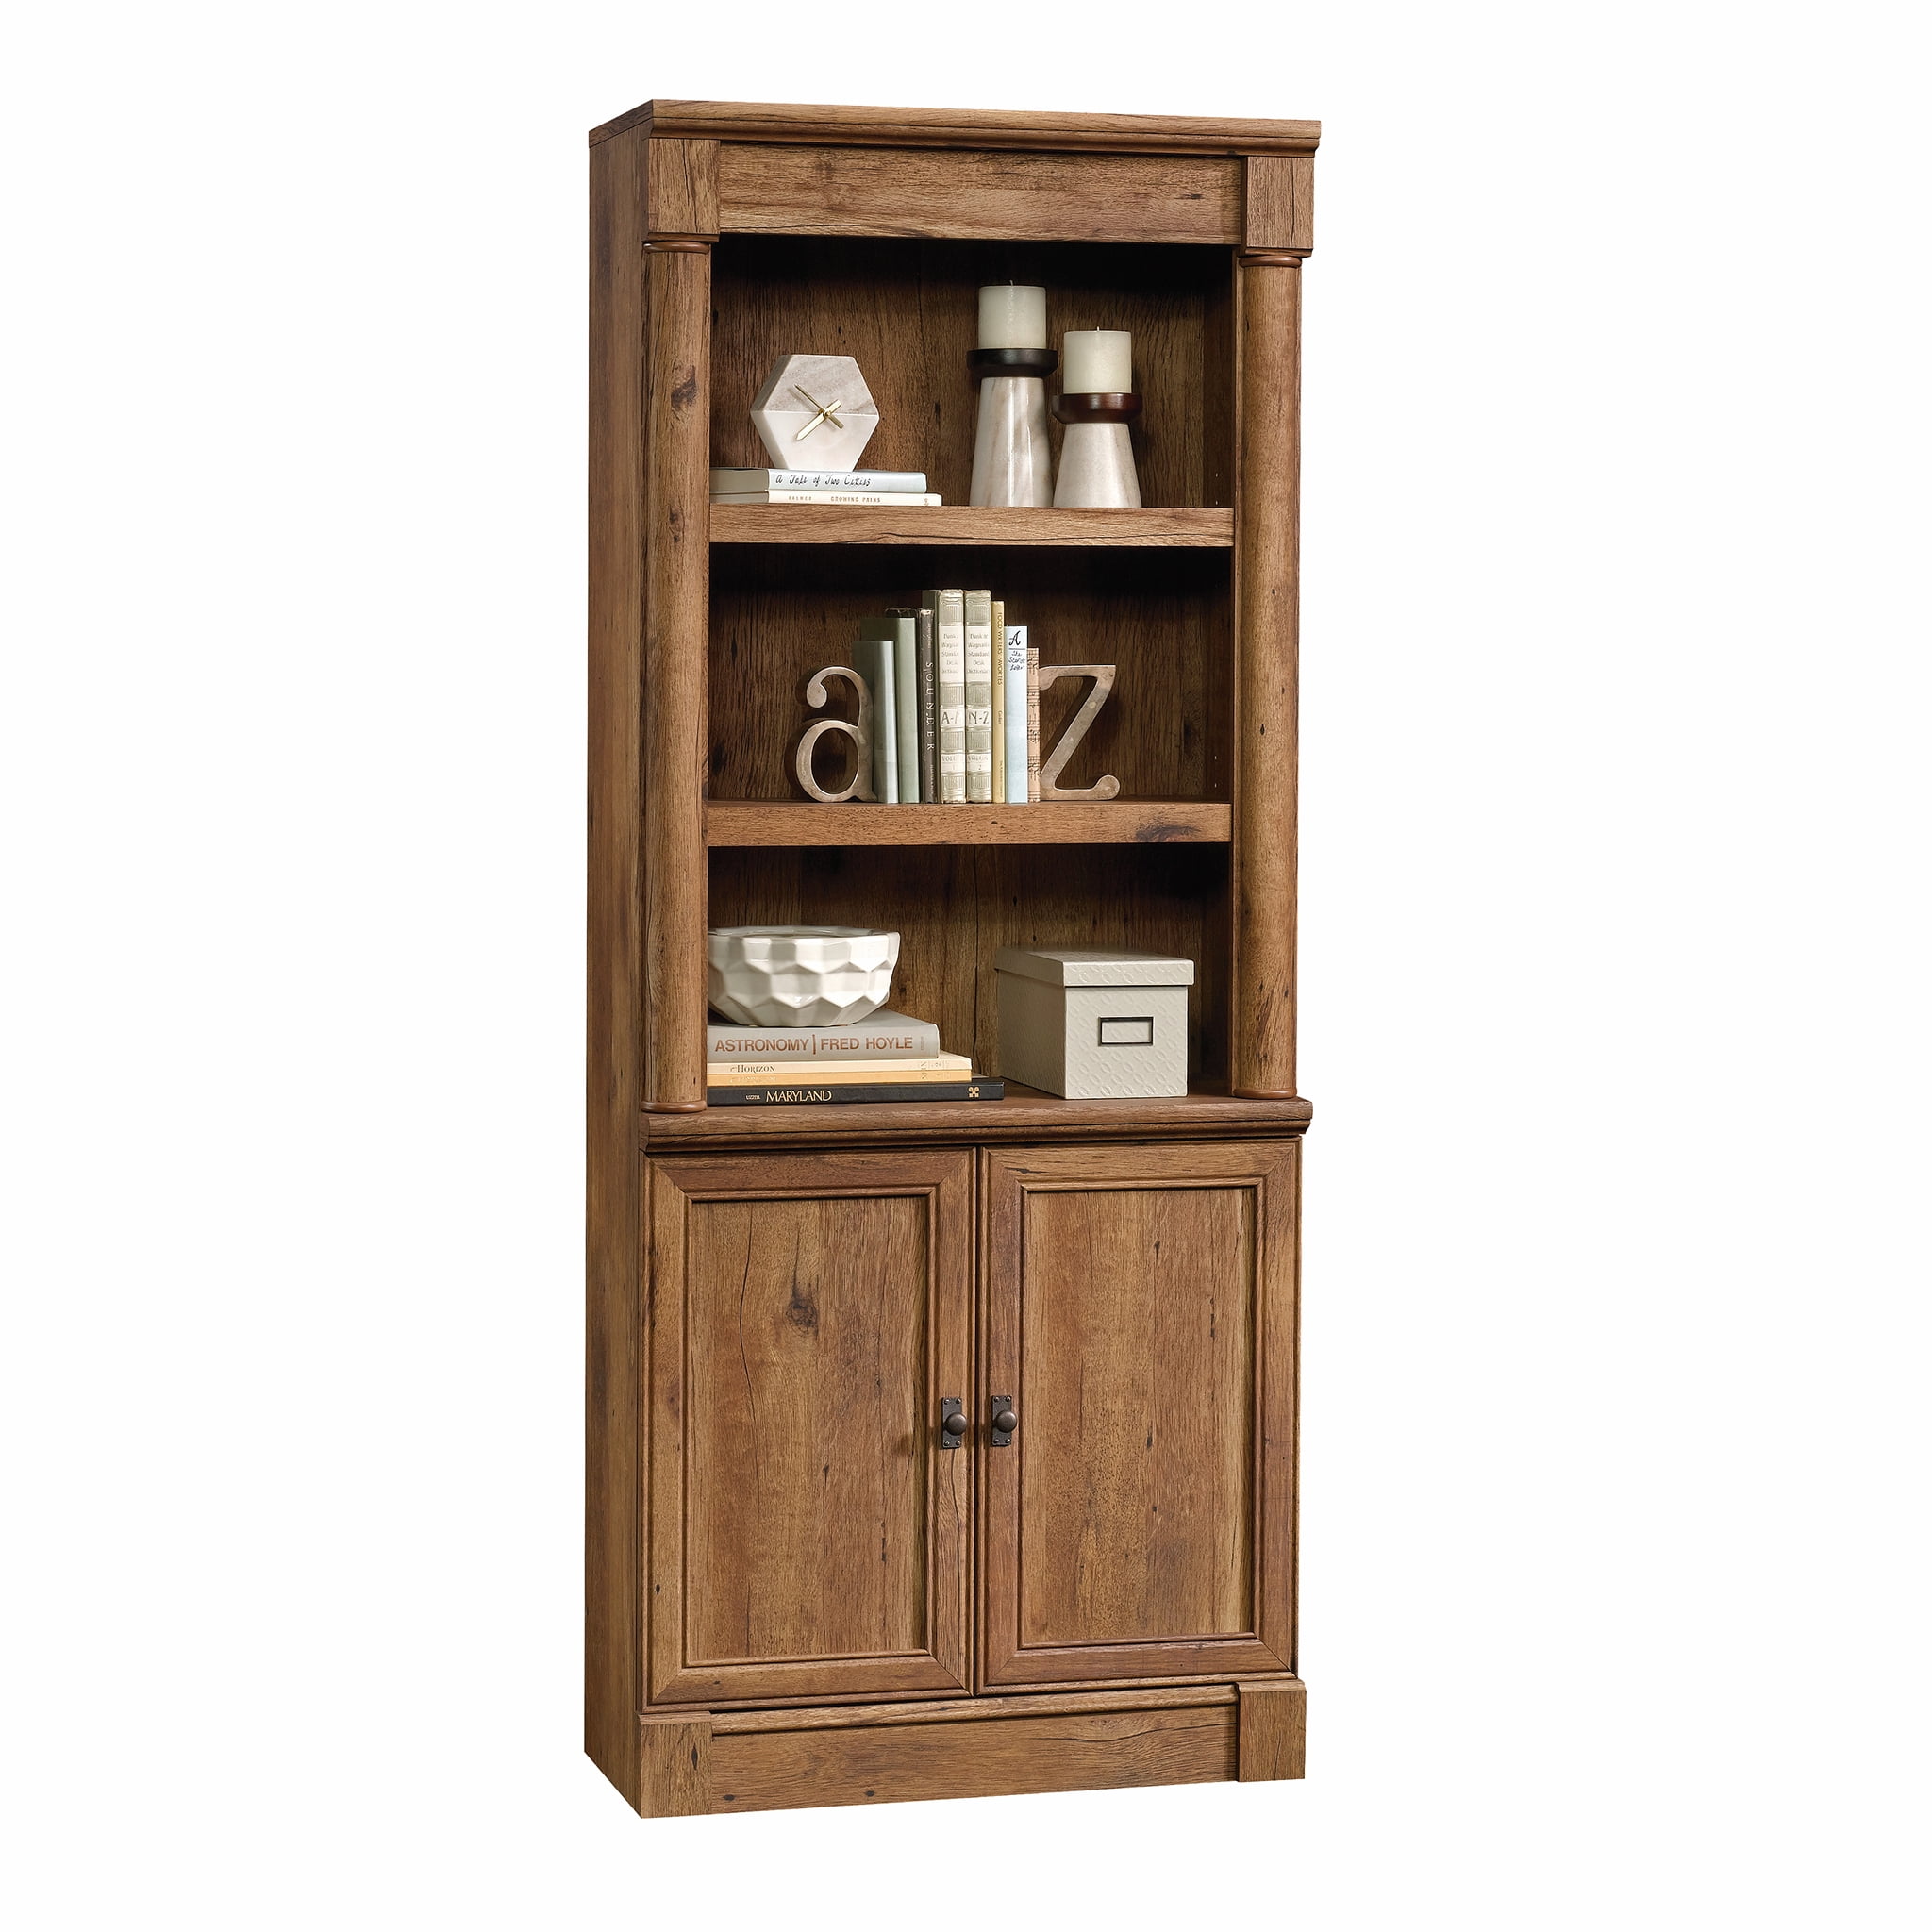 Sauder 71 Heritage Hill Library, Sauder Heritage Hill 2 Door Bookcase Classic Cherry Blossom